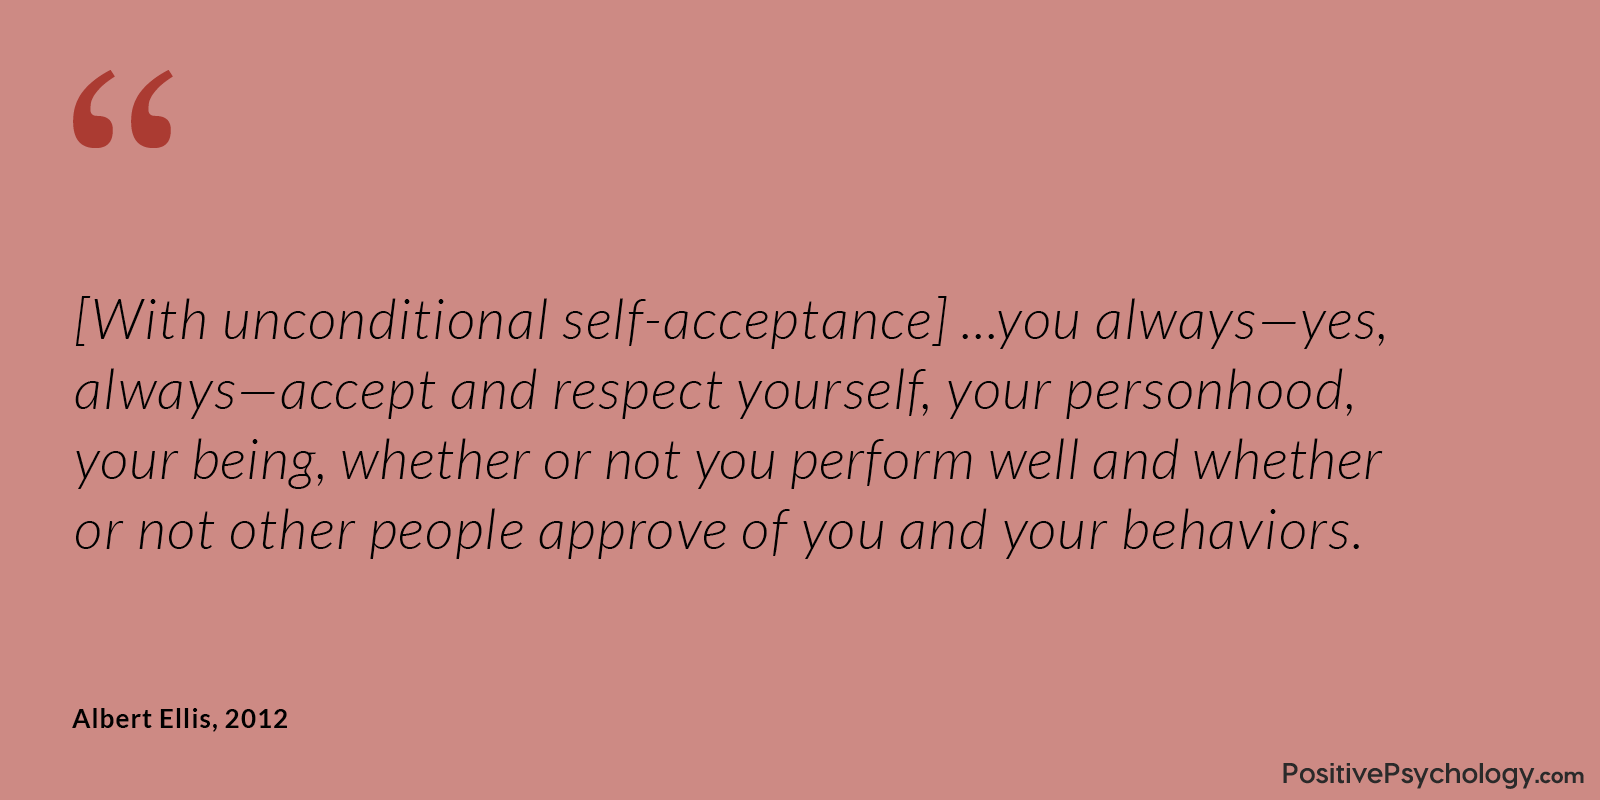 19 Self Acceptance Quotes For Relating To Yourself In A Healthier Way